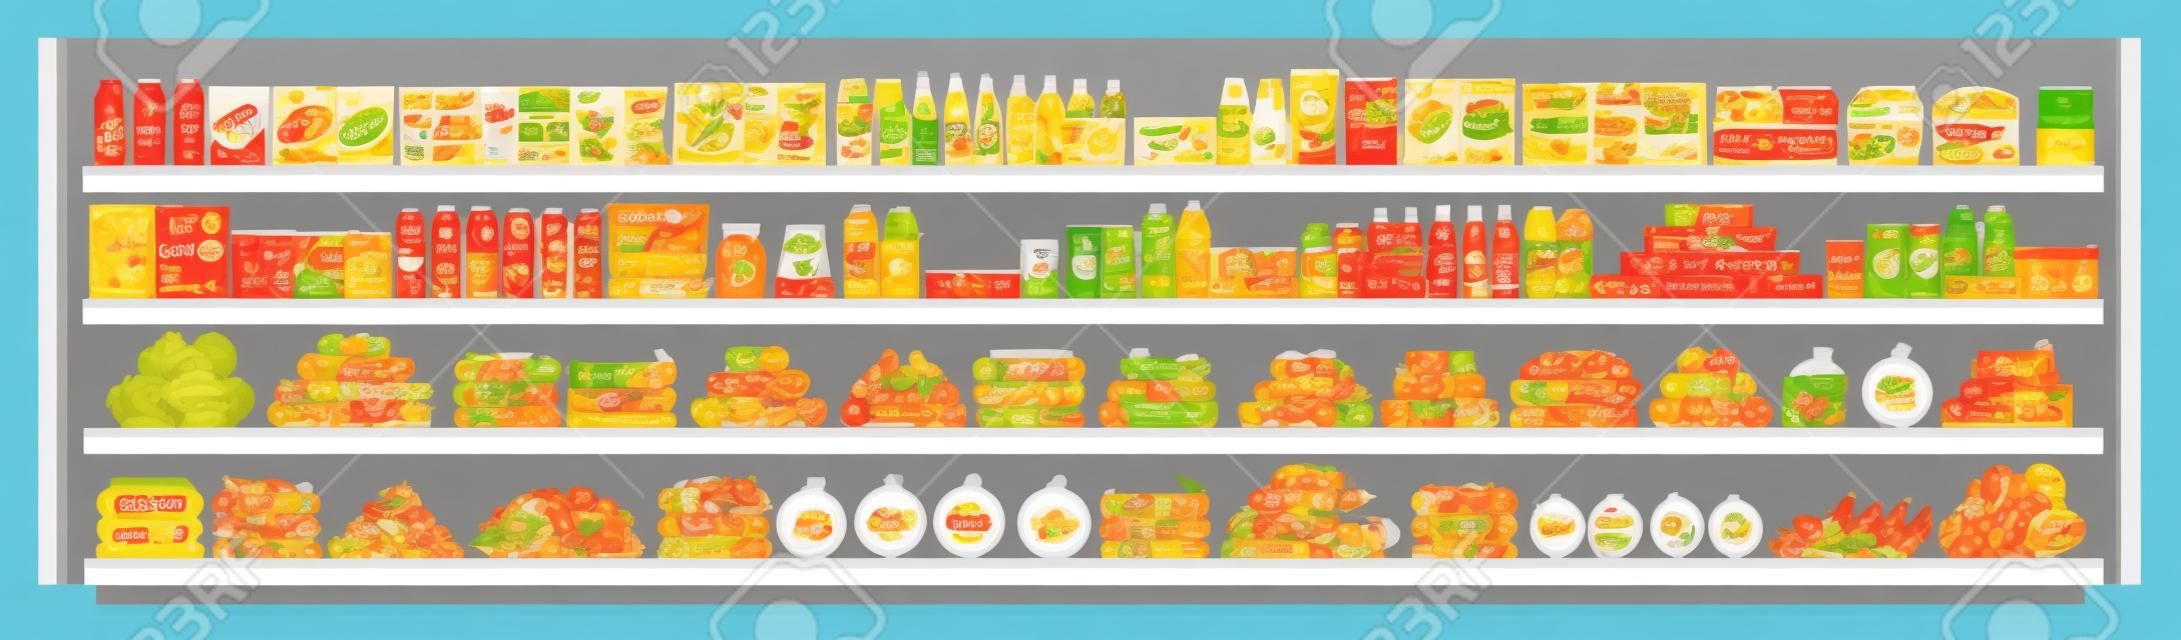 Grocery items on the supermarket shelves and offers full with assortment of food and drinks flat vector seamless background illustration. Shopping and retail concept.